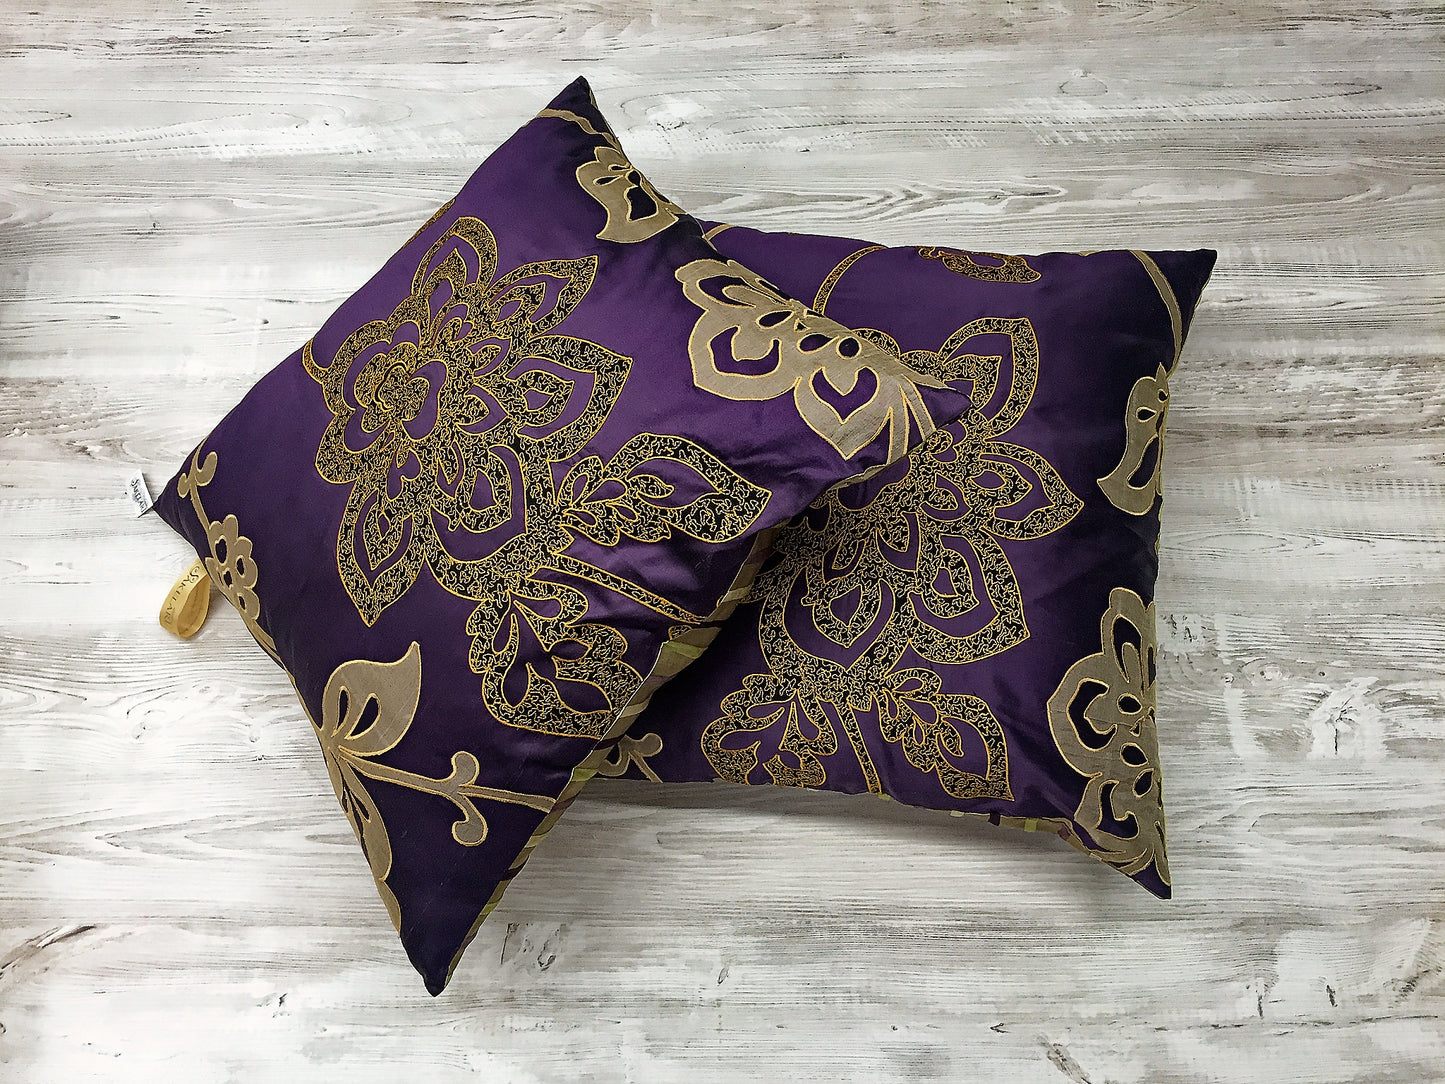 Luxury cushion collection "Flori Embroidery" Set of 3 Cushions